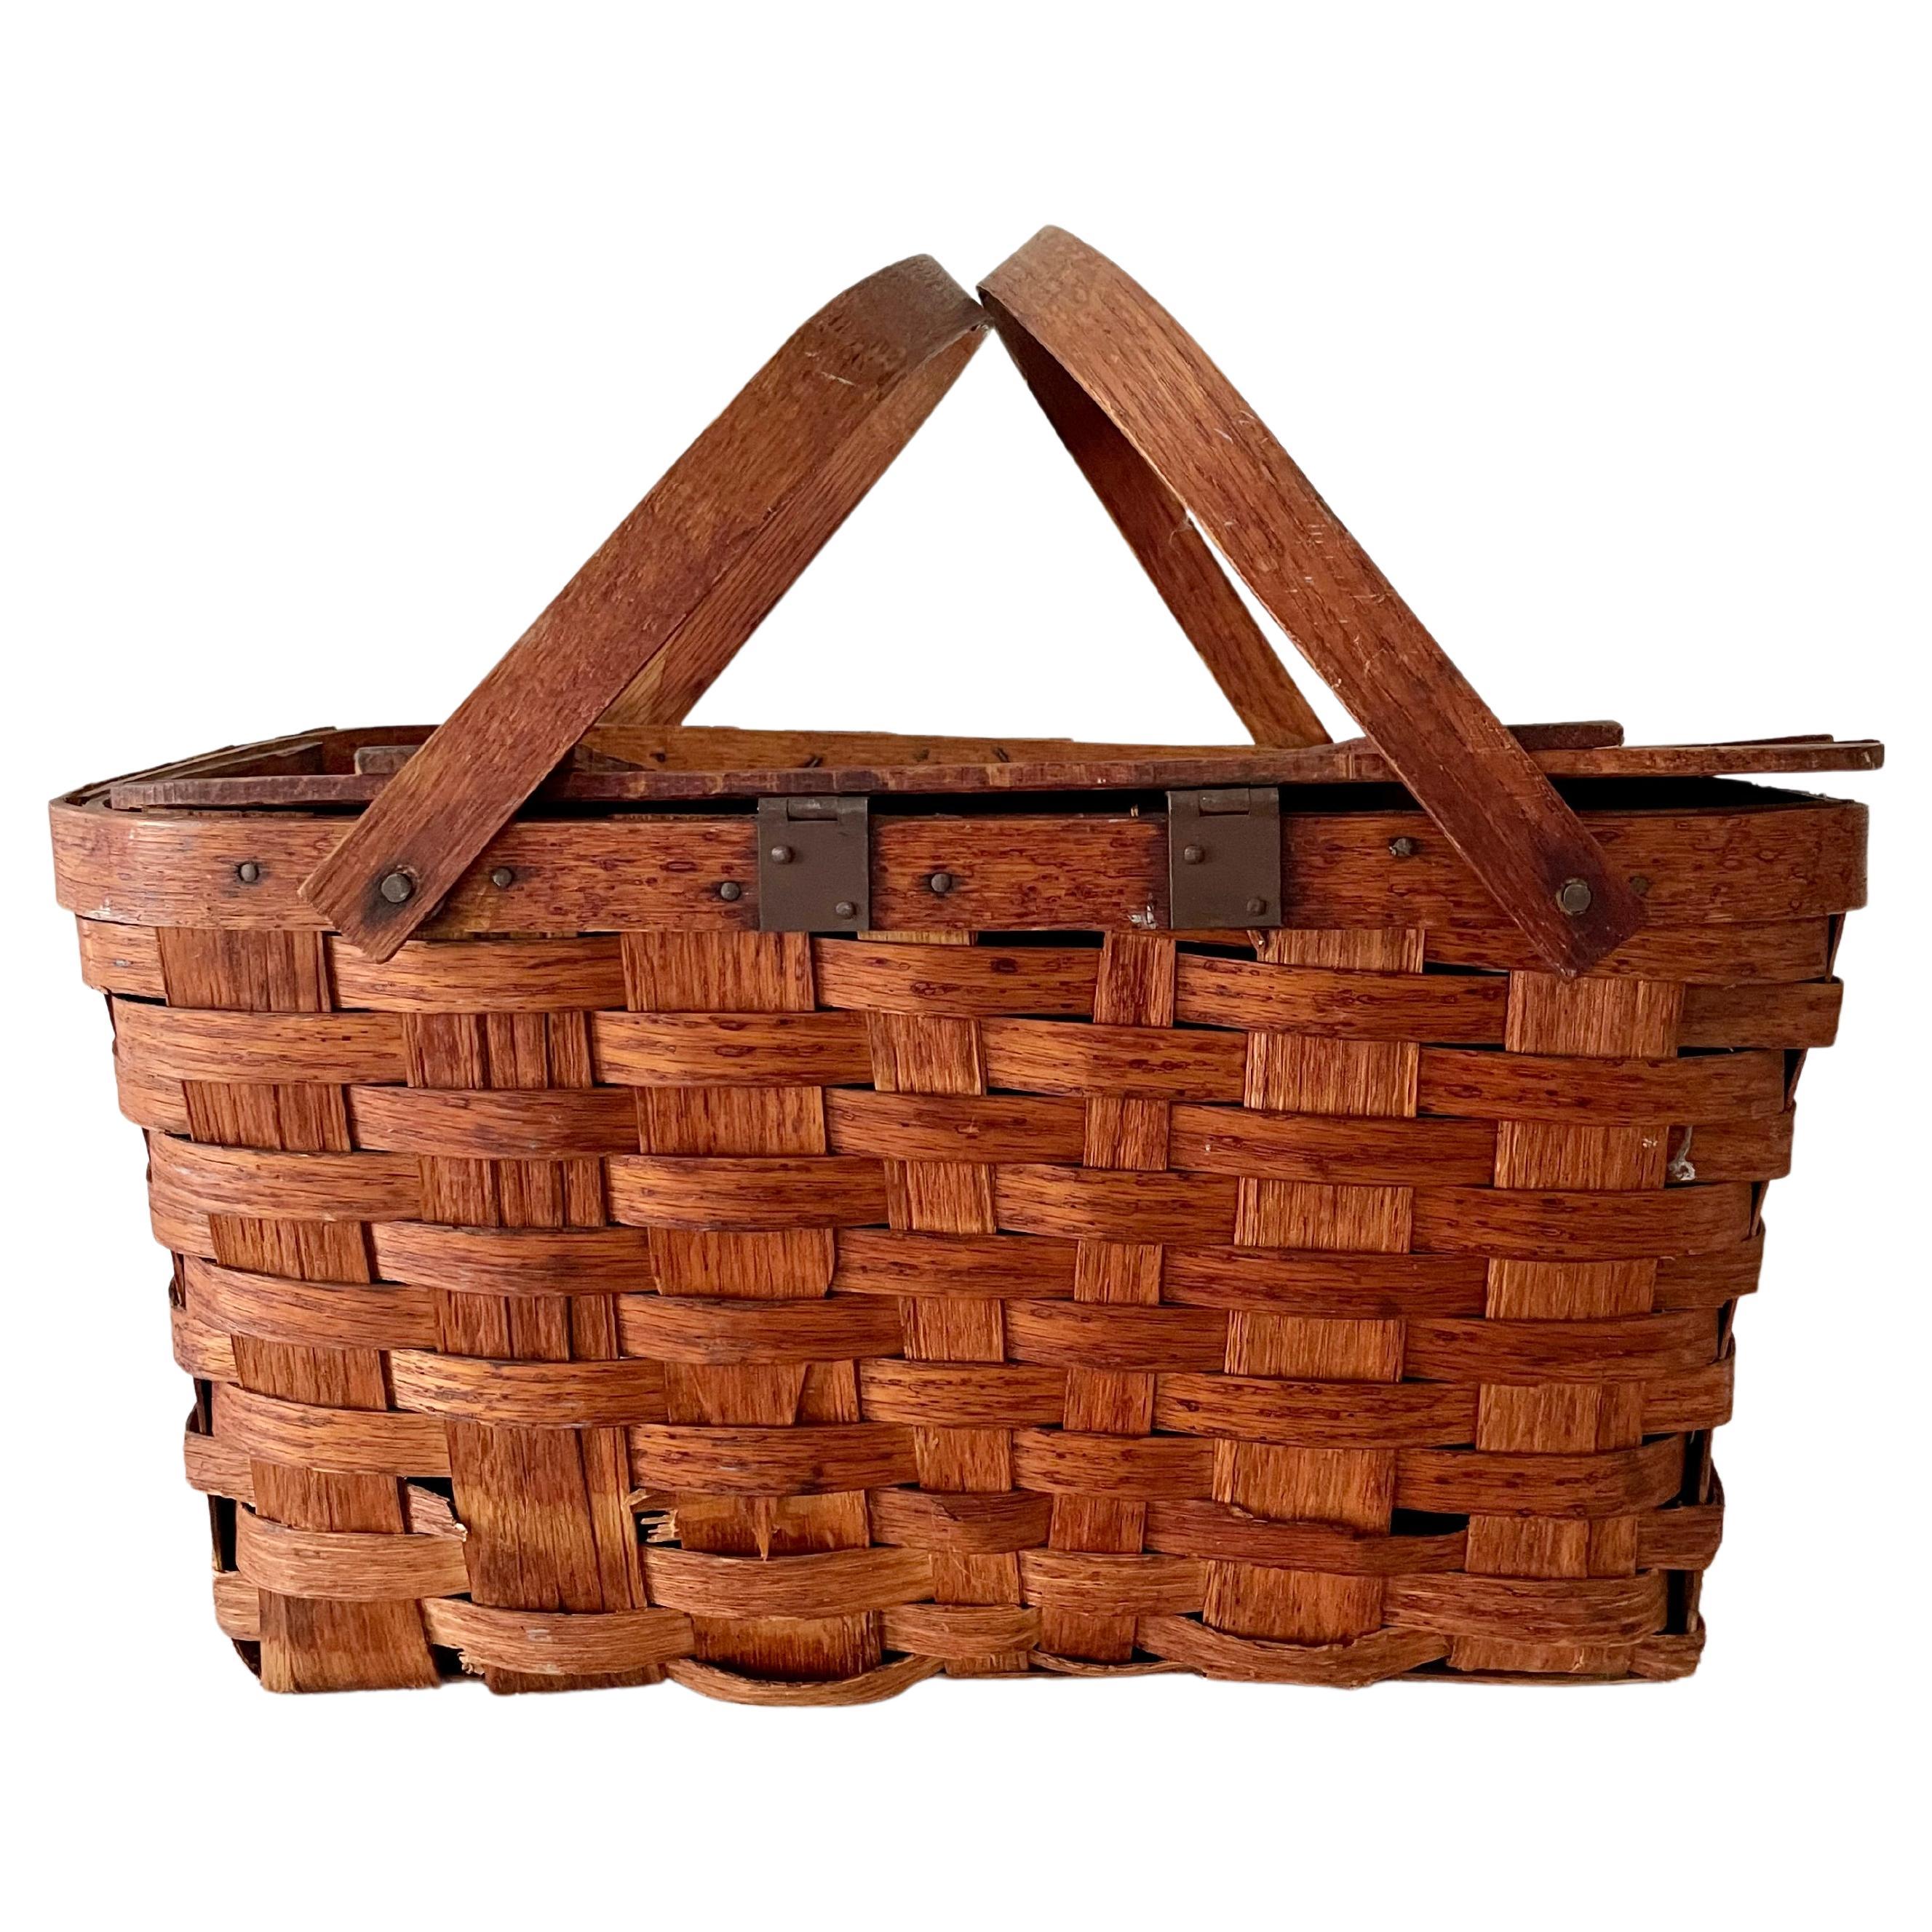 Woven Hinged Lid Picnic Basket with Handles